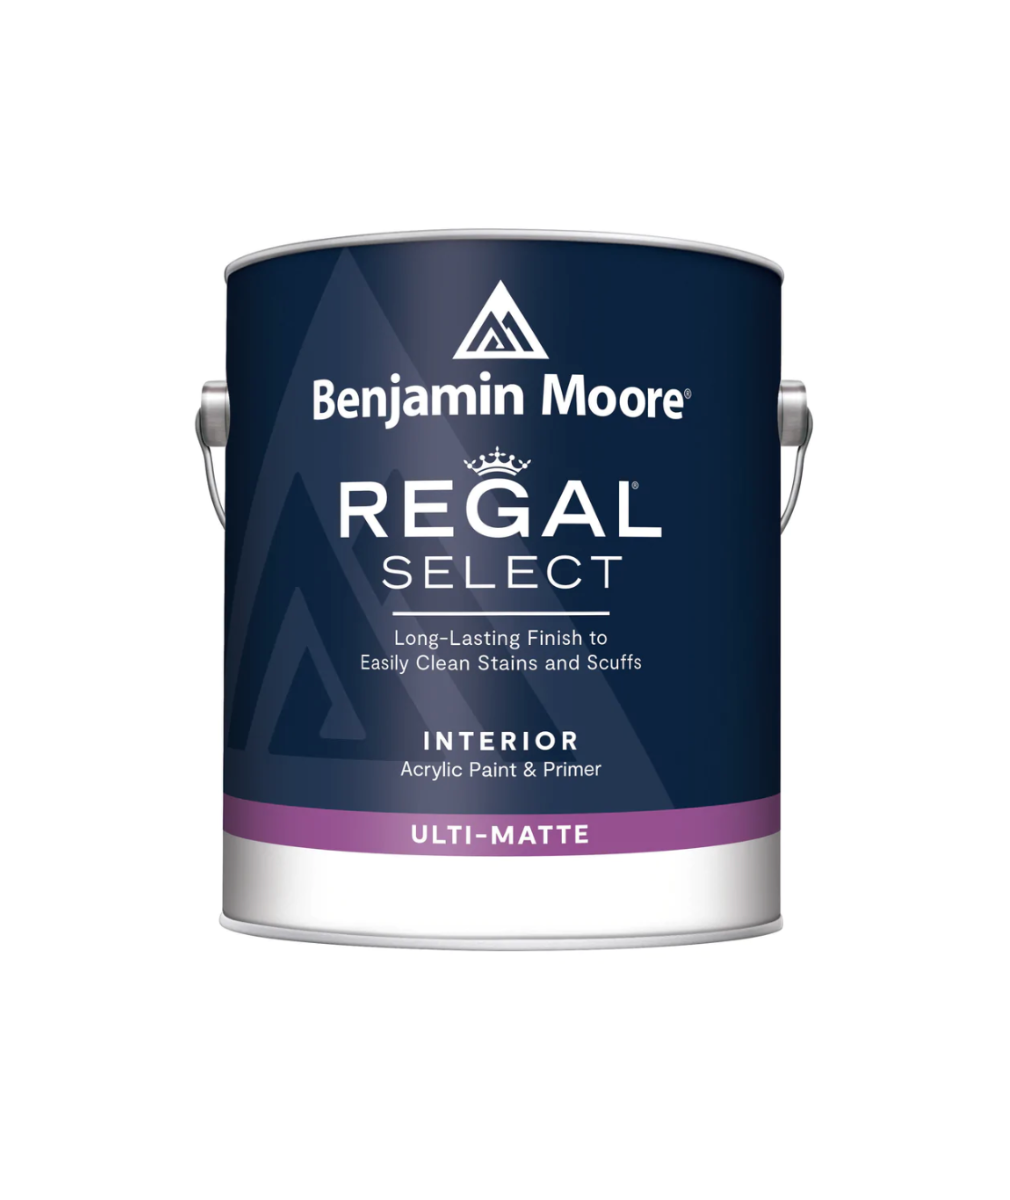 Benjamin Moore Regal Select Matte Paint available at JC Licht.